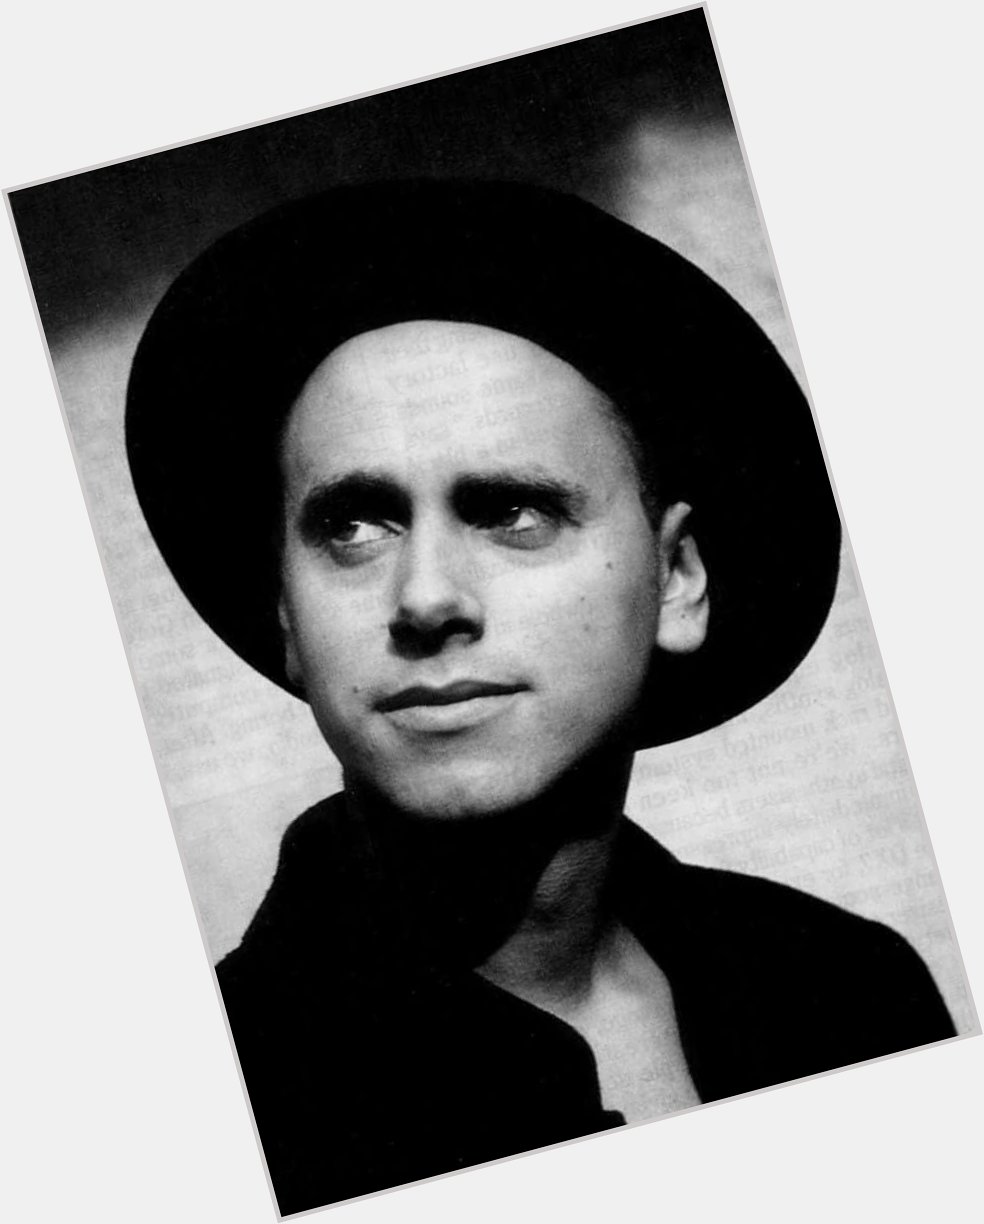 Happy birthday, Martin Gore.
Mega-talented songwriter, musician, singer and performer     